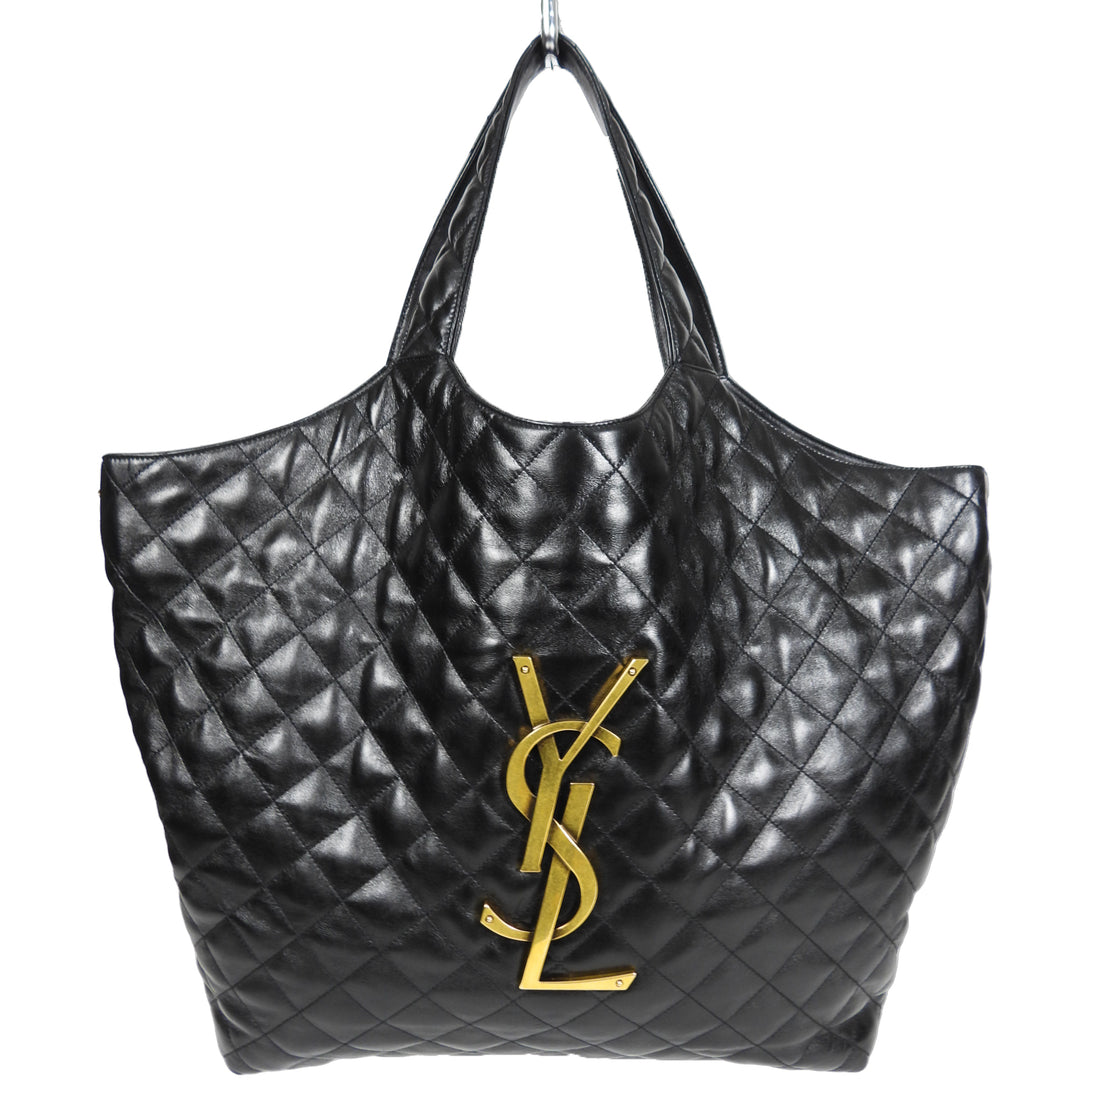 YSL ICARE maxi shopping bag in quilted lambskin: Buy Online at